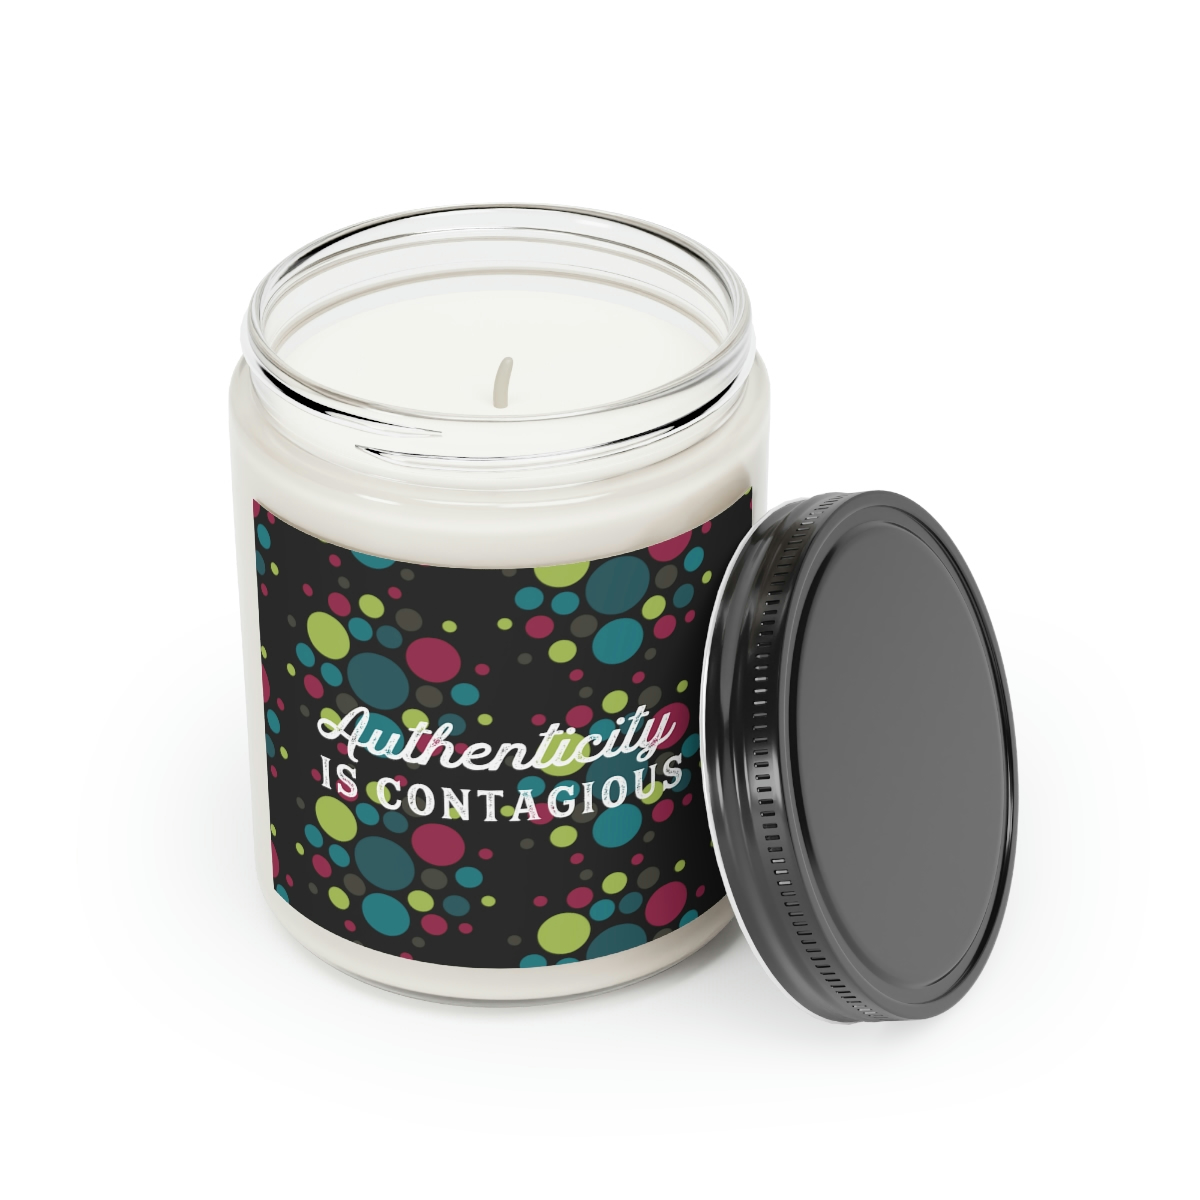 Authenticity is Contagious Scented Candle, 9oz